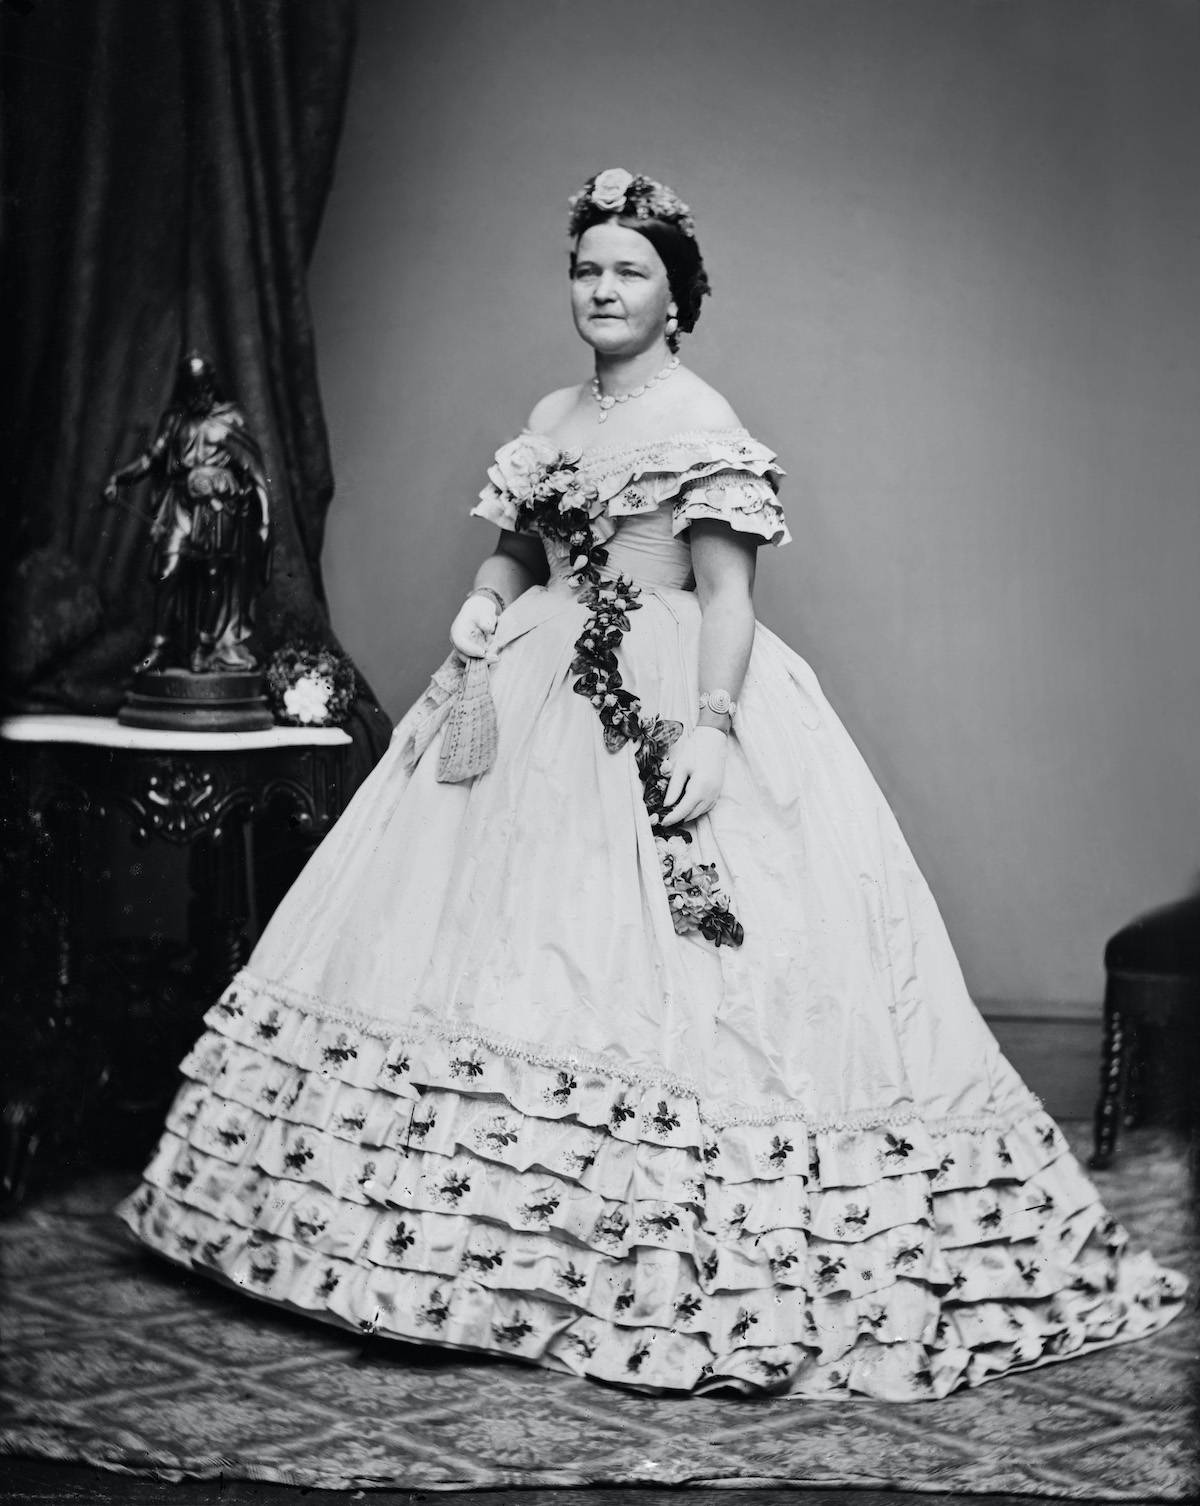 Mary Todd Lincoln, 1861 / Fot. Glasshouse Vintage/Universal History Archive/Universal Images Group via Getty Images